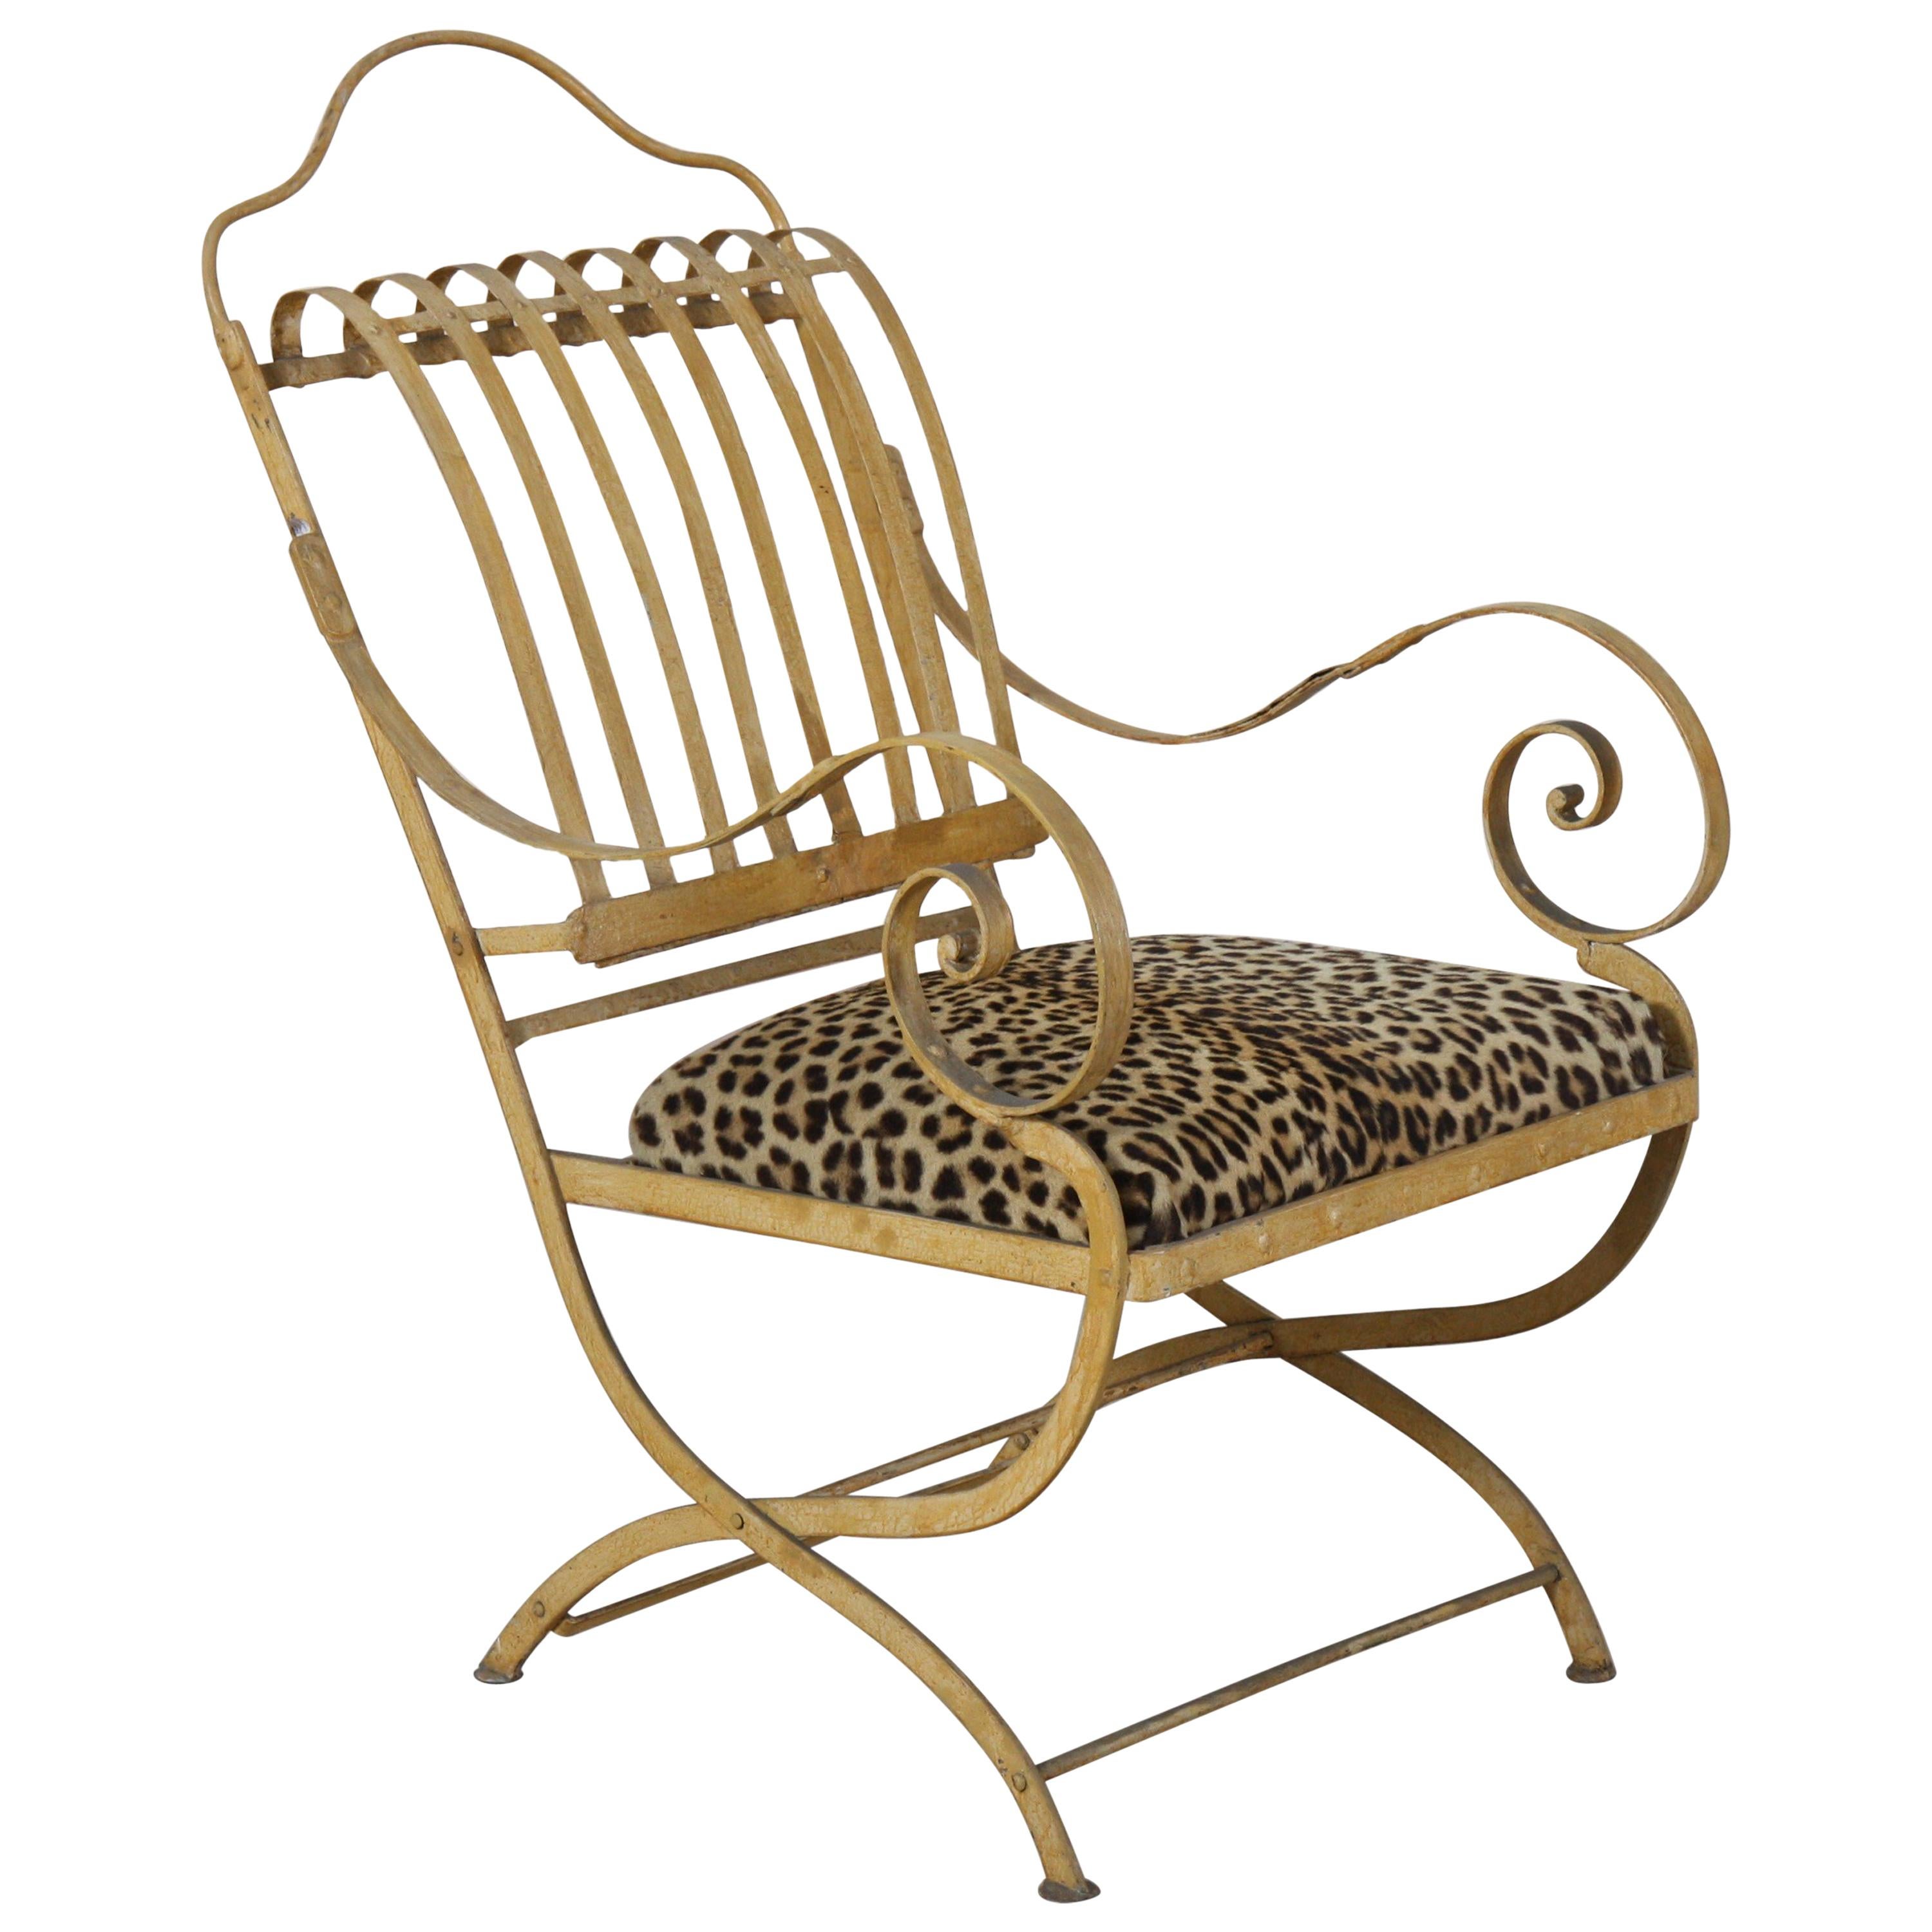 Wrought Iron Armchair For Sale